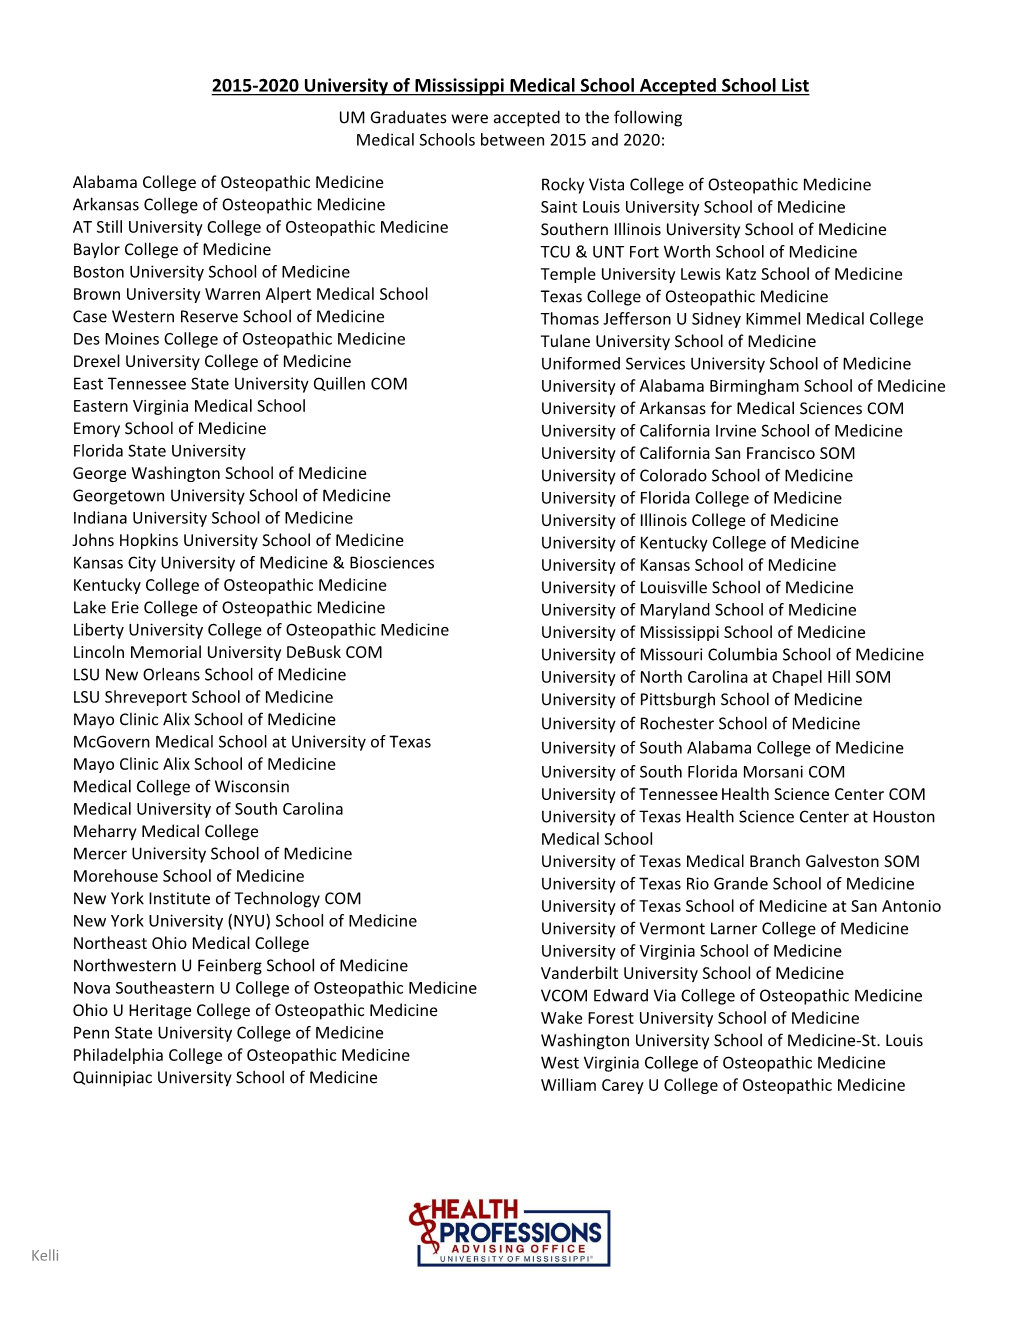 2015-2020 University of Mississippi Medical School Accepted School List UM Graduates Were Accepted to the Following Medical Schools Between 2015 and 2020